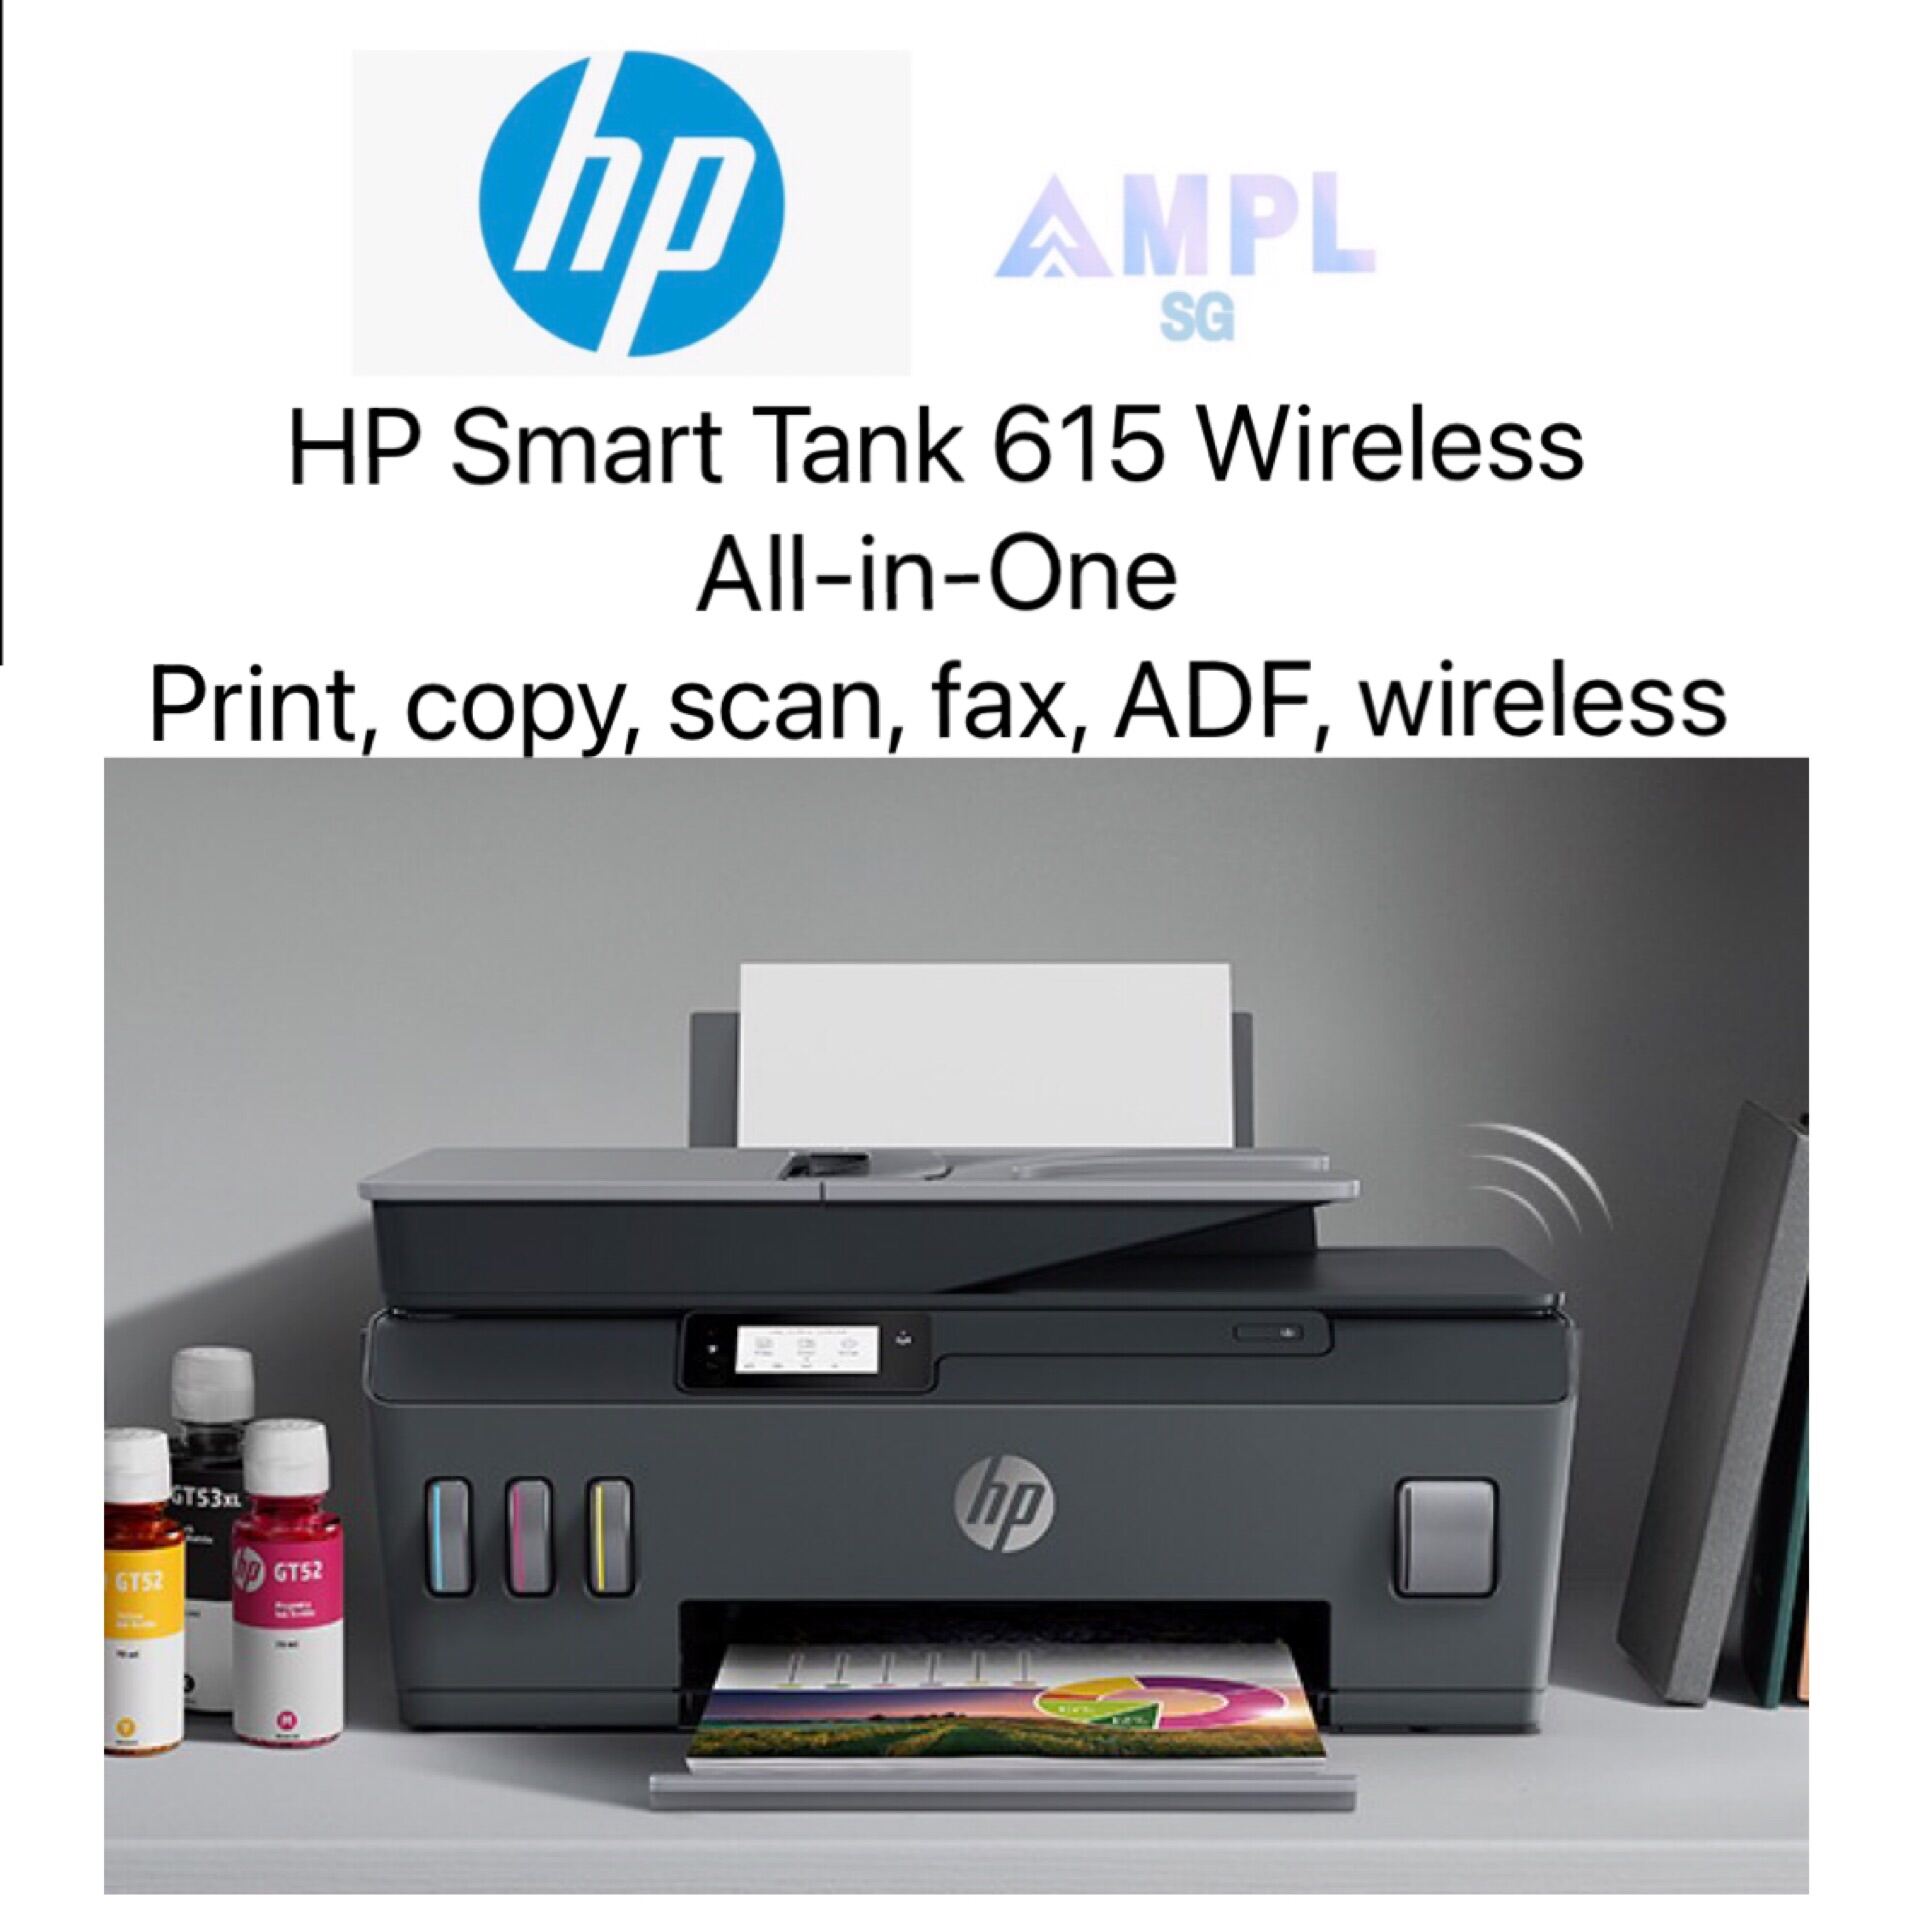 HP Smart Tank 615 Wireless All-in-One  Print, copy, scan, fax, ADF, wireless Singapore